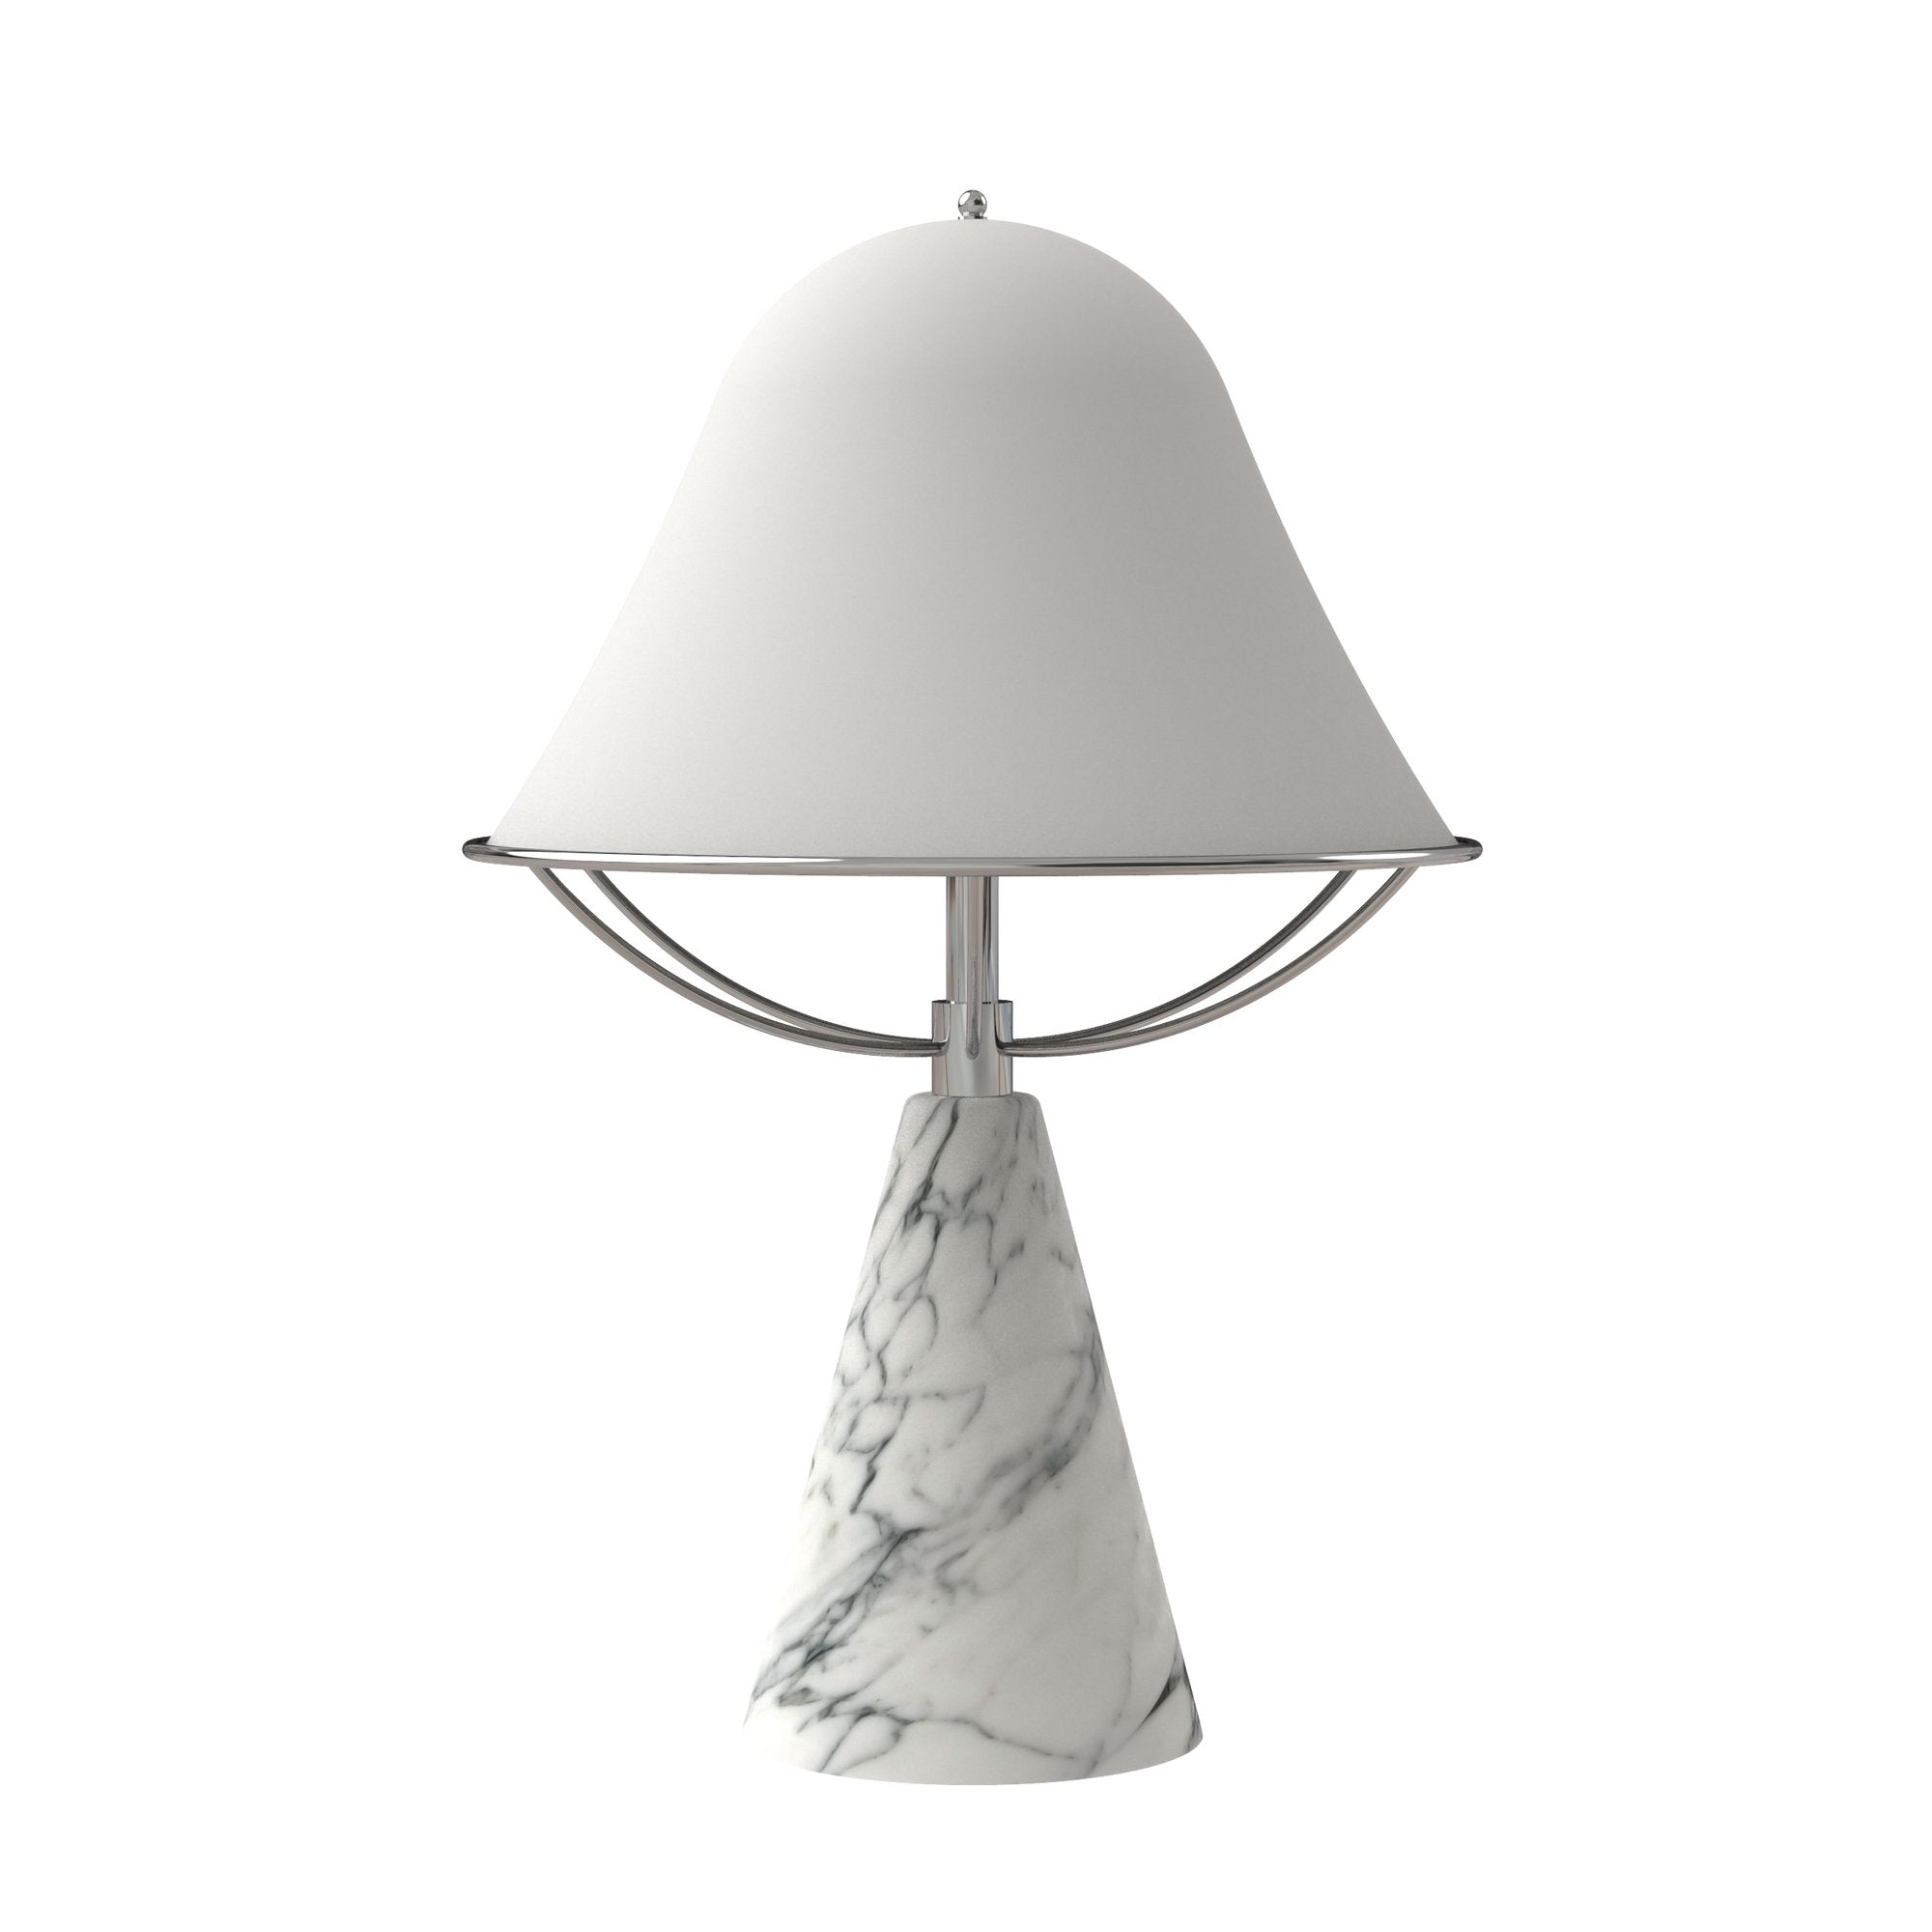 Replacement glass shade for Anita lamp